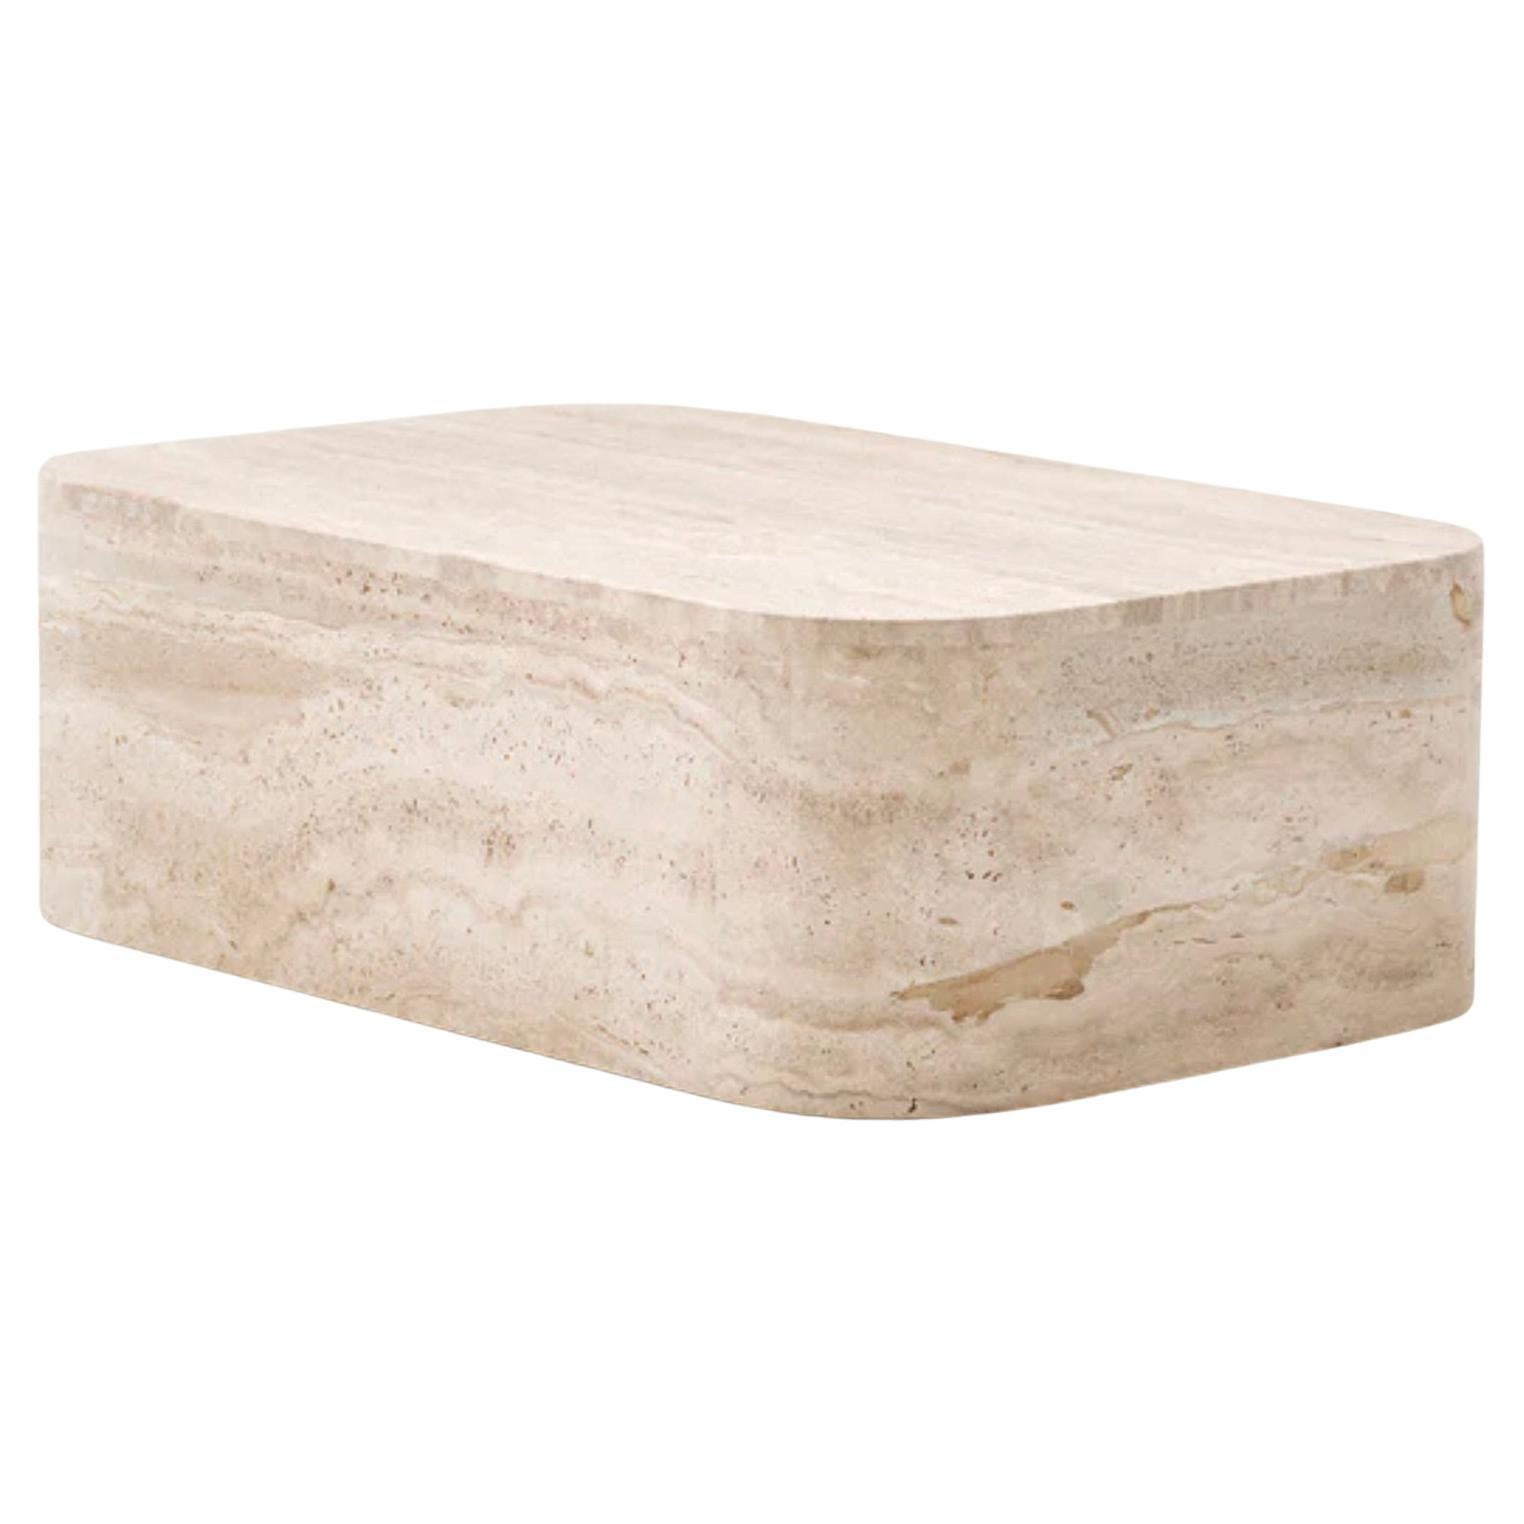 Sofia Coffee Table by Just Adele in Travertine